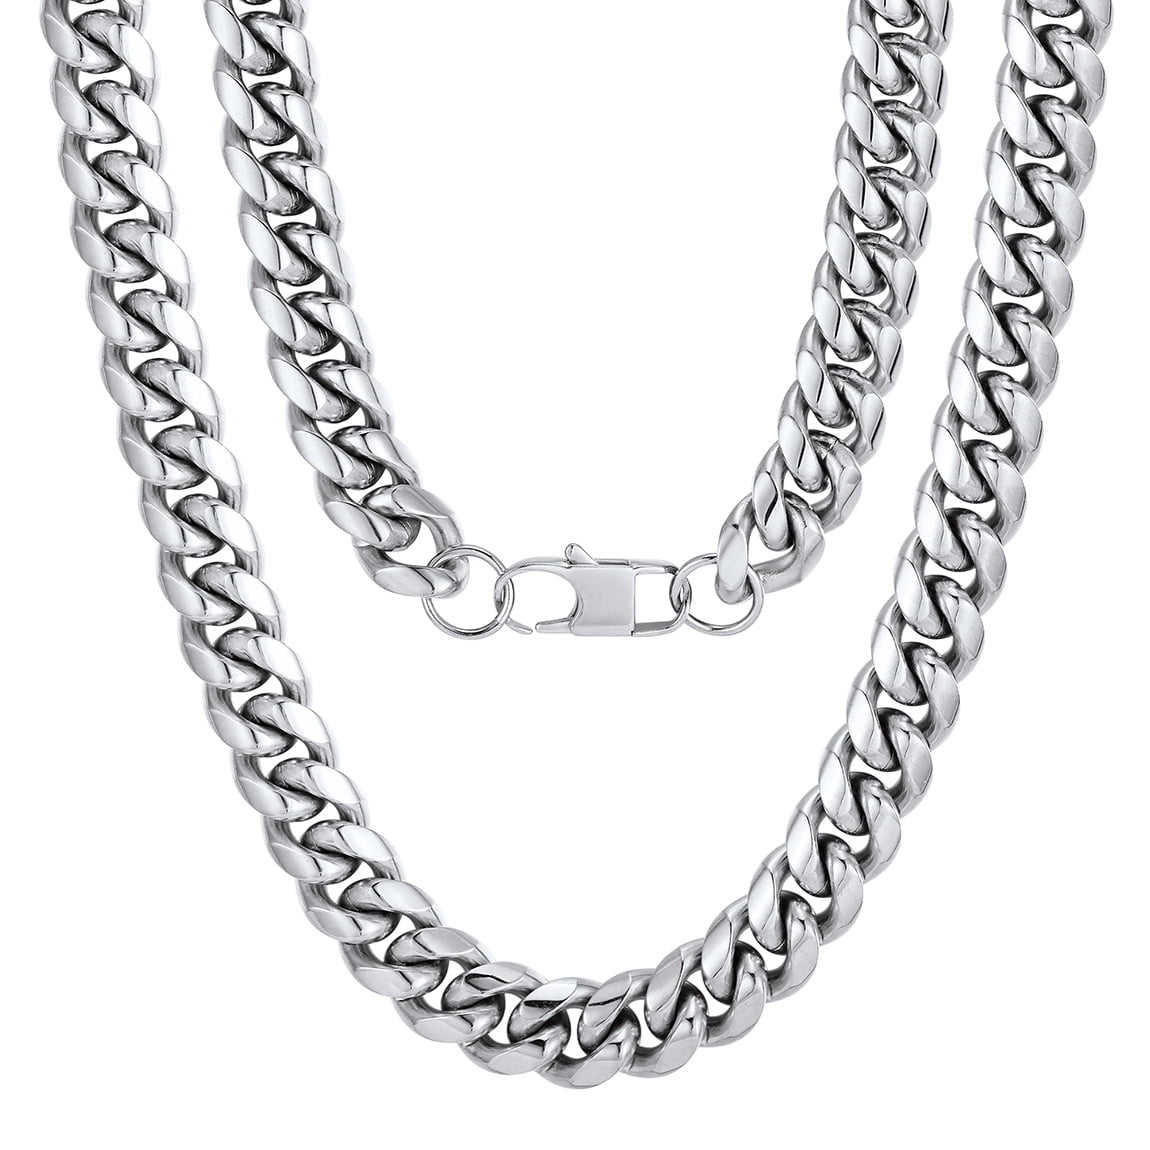 Details about   Men's 9mm Stainless Steel Chain Necklaces Cuban Link Curb Chain Gift box 